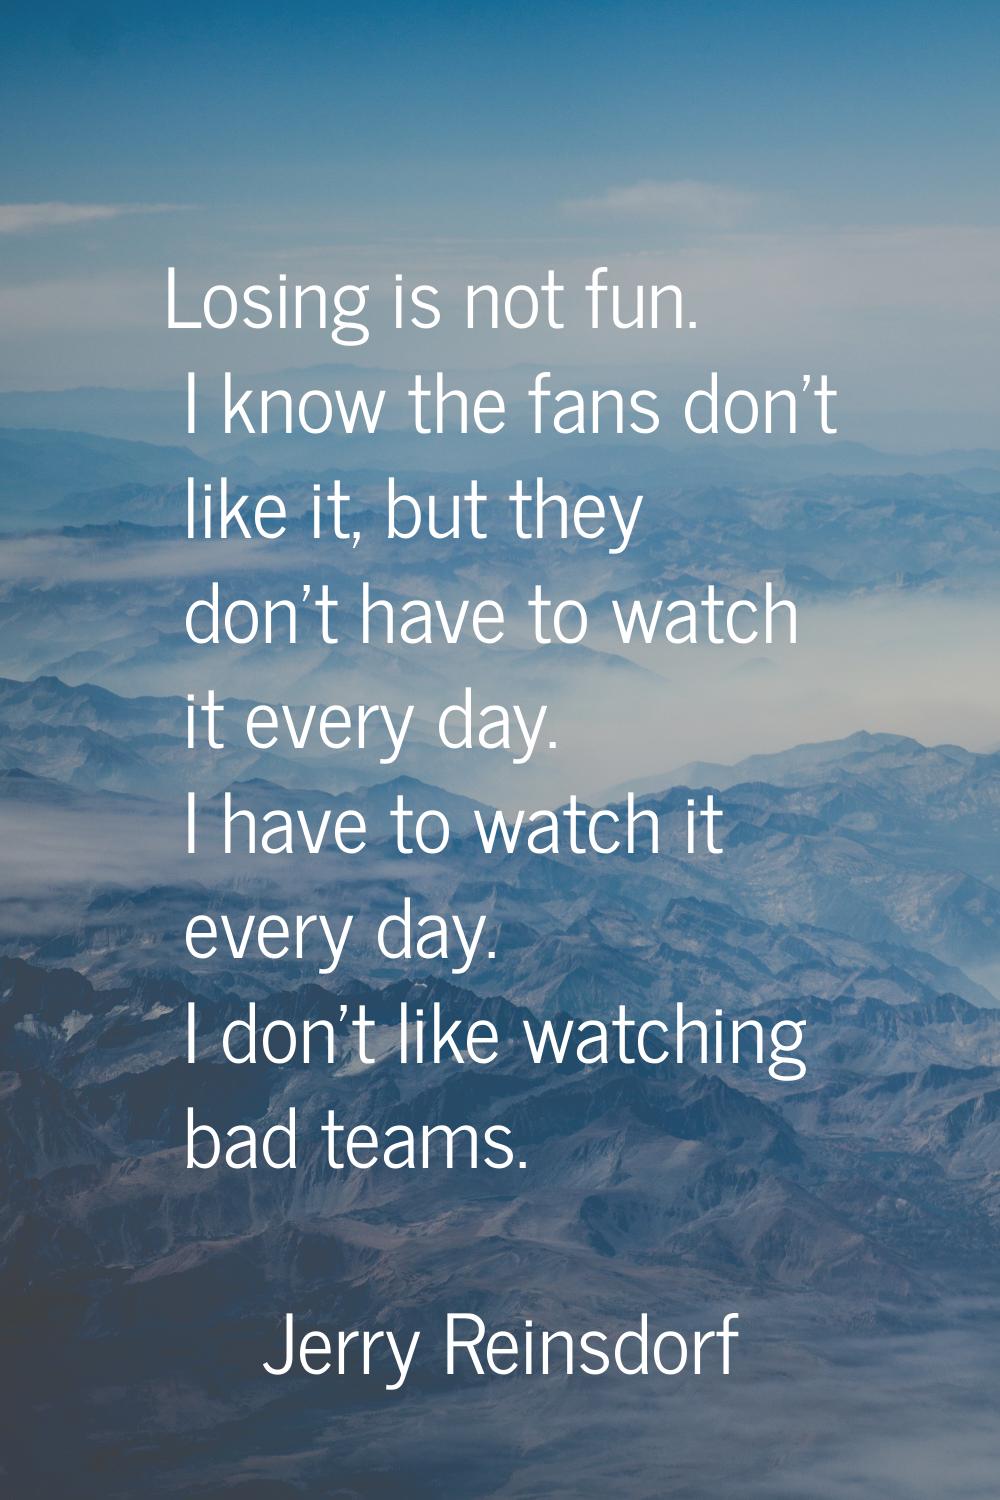 Losing is not fun. I know the fans don't like it, but they don't have to watch it every day. I have